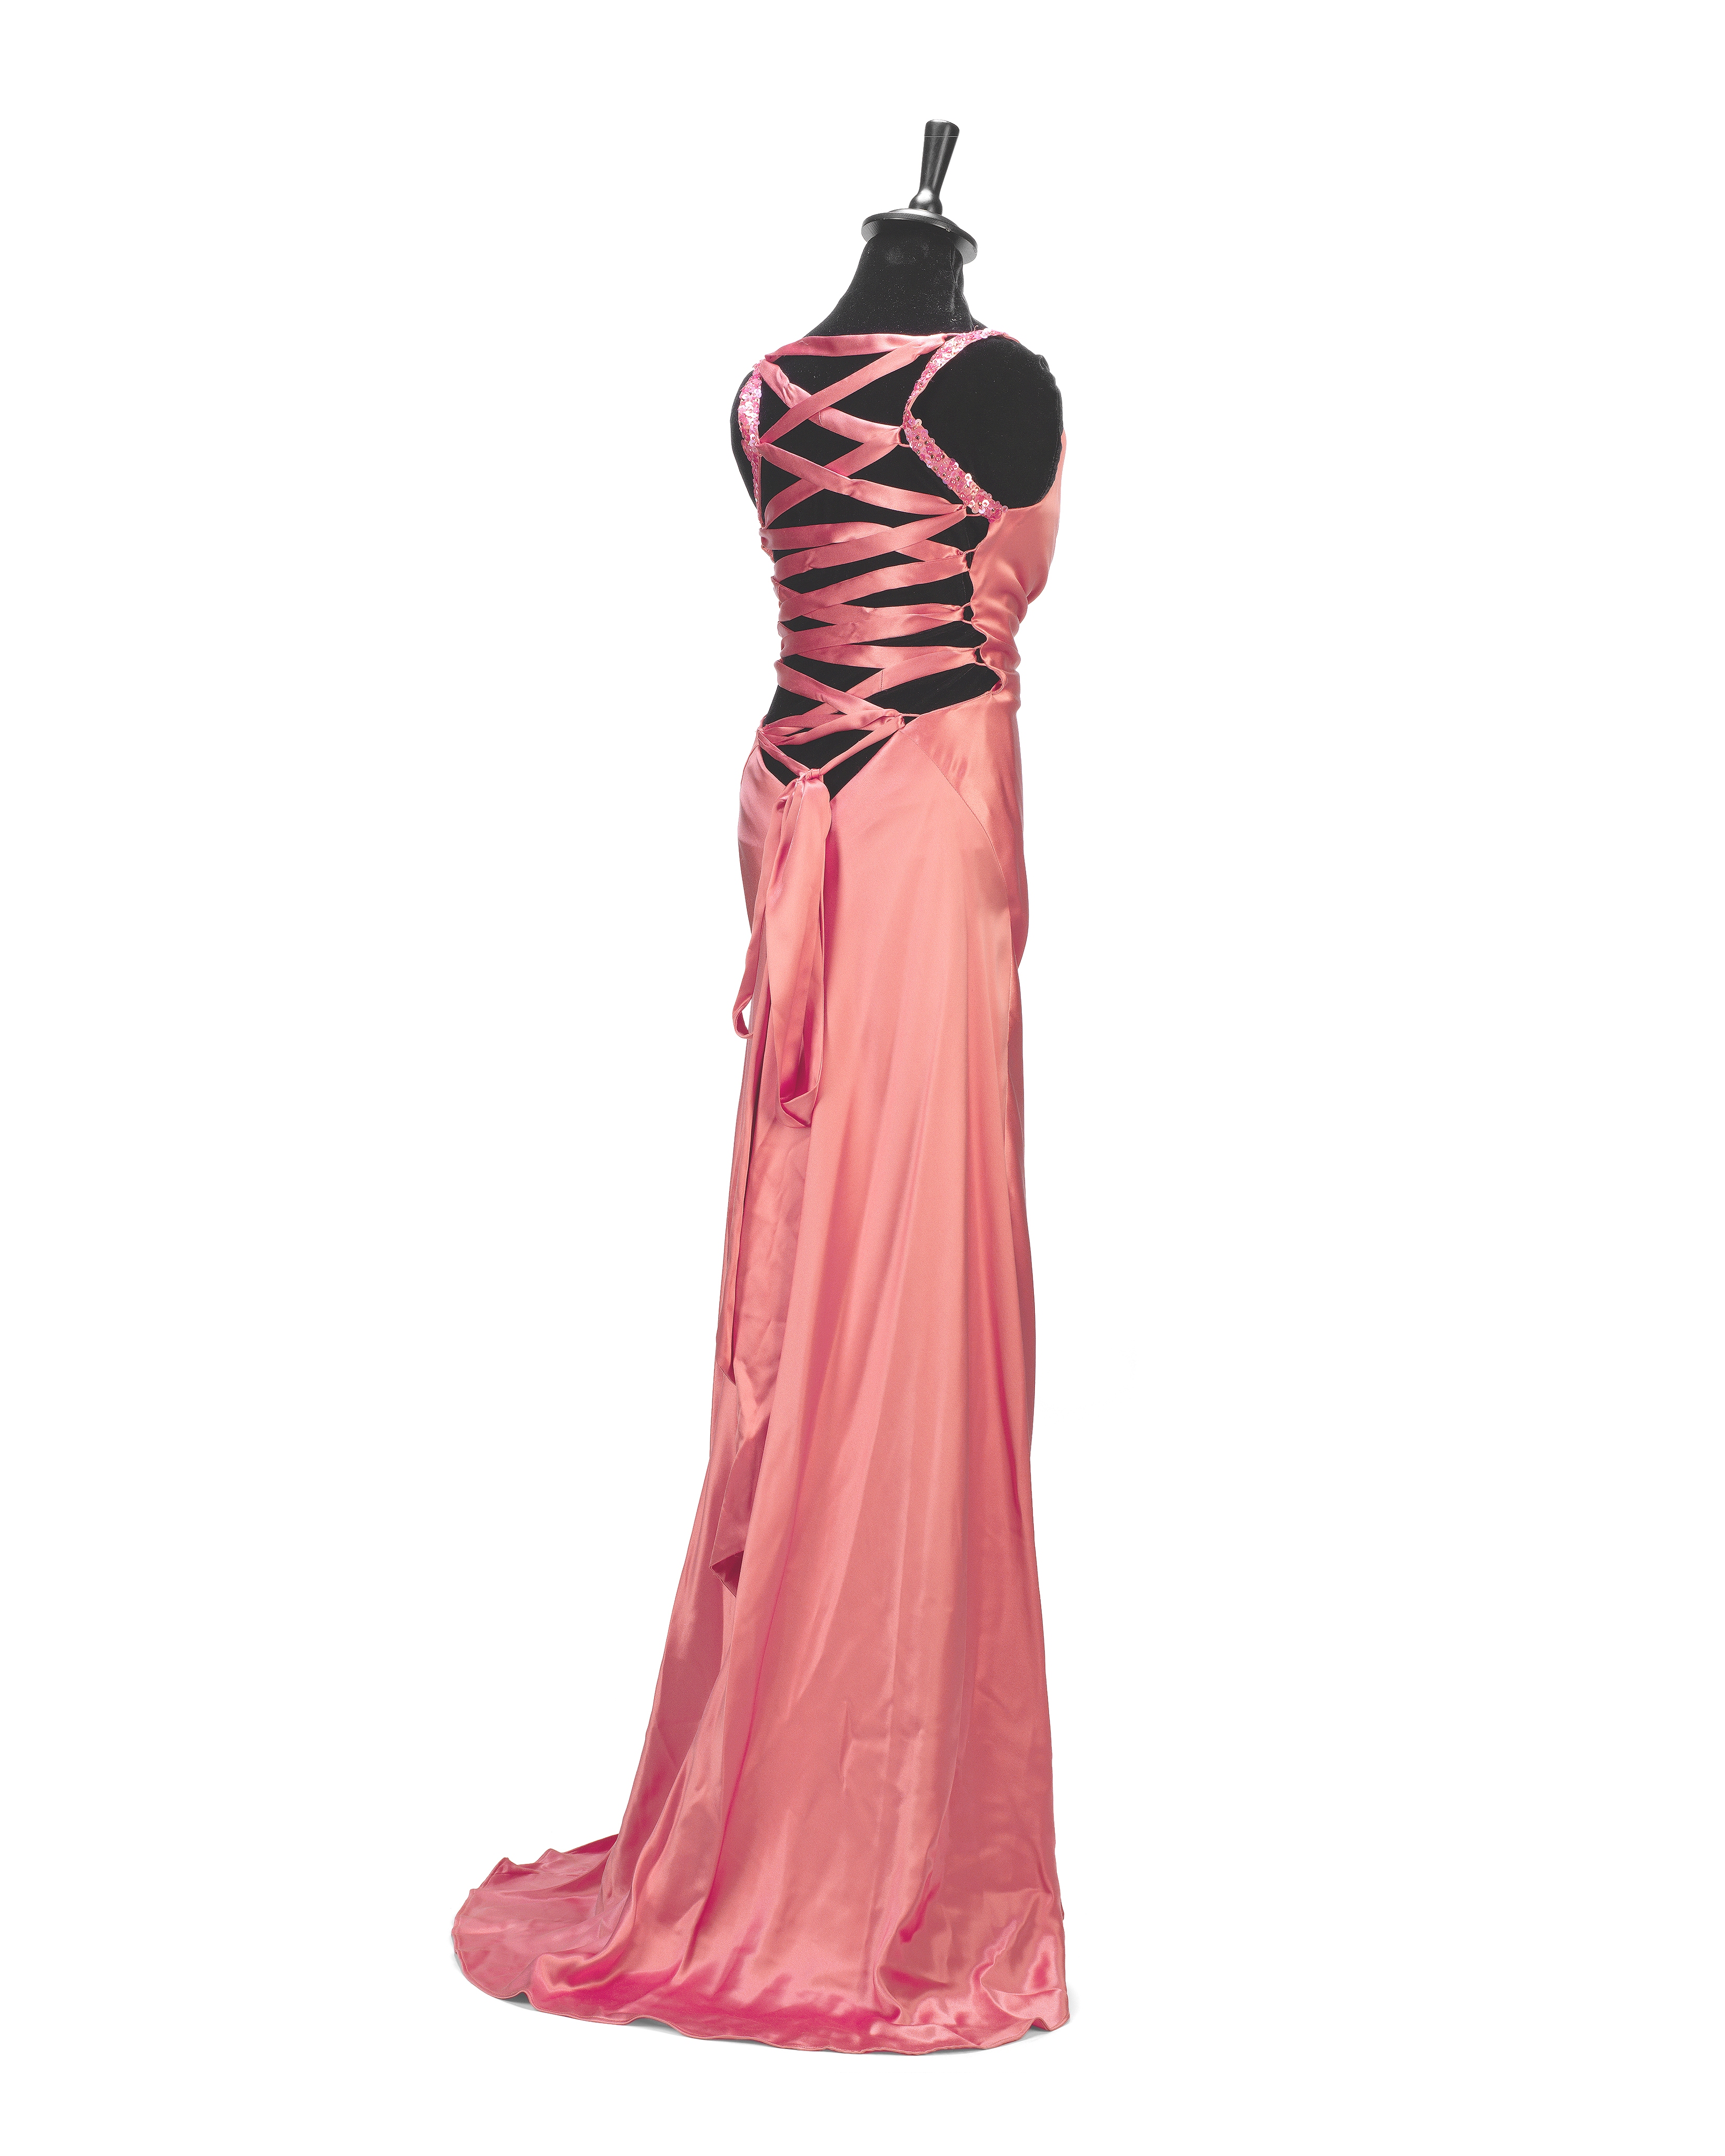 Casino Royale / Caterina Murino: A screen-used pink satin dress worn by Caterina Murino for her r... - Image 3 of 3